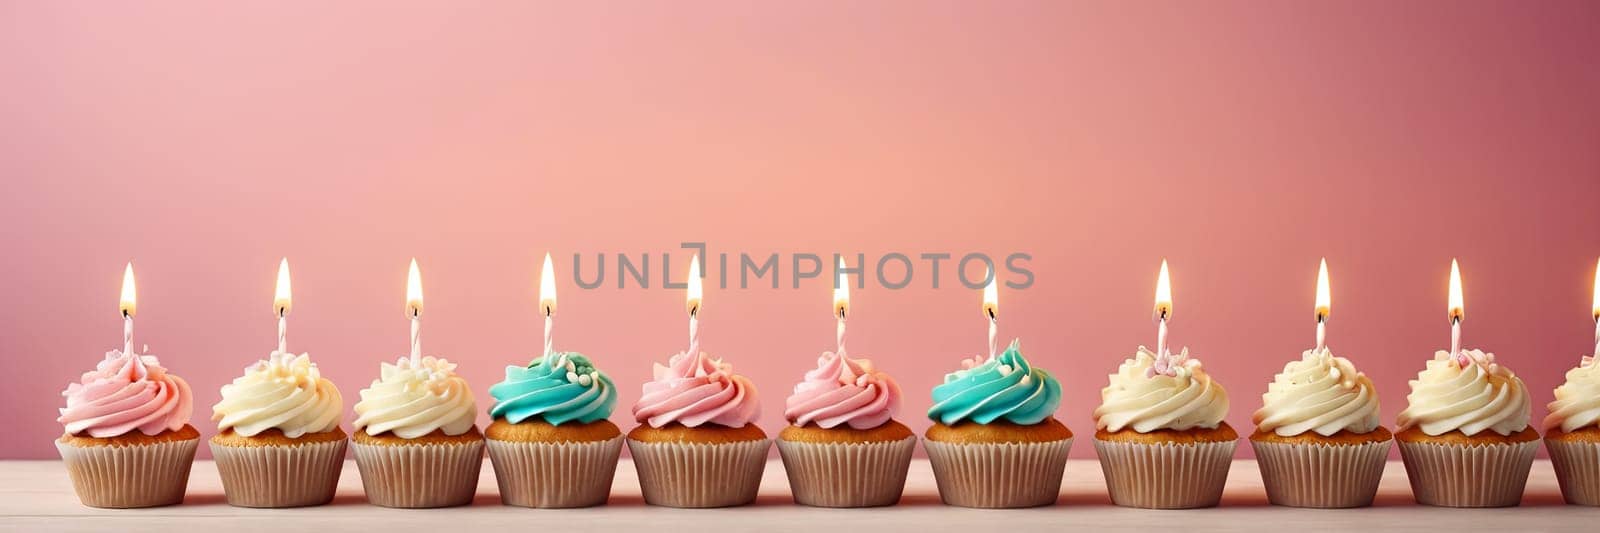 Colorful cupcakes with lit candles are displayed against a pink background, indicating an indoor celebration event marking of joy and celebrating. banner with free space by Matiunina